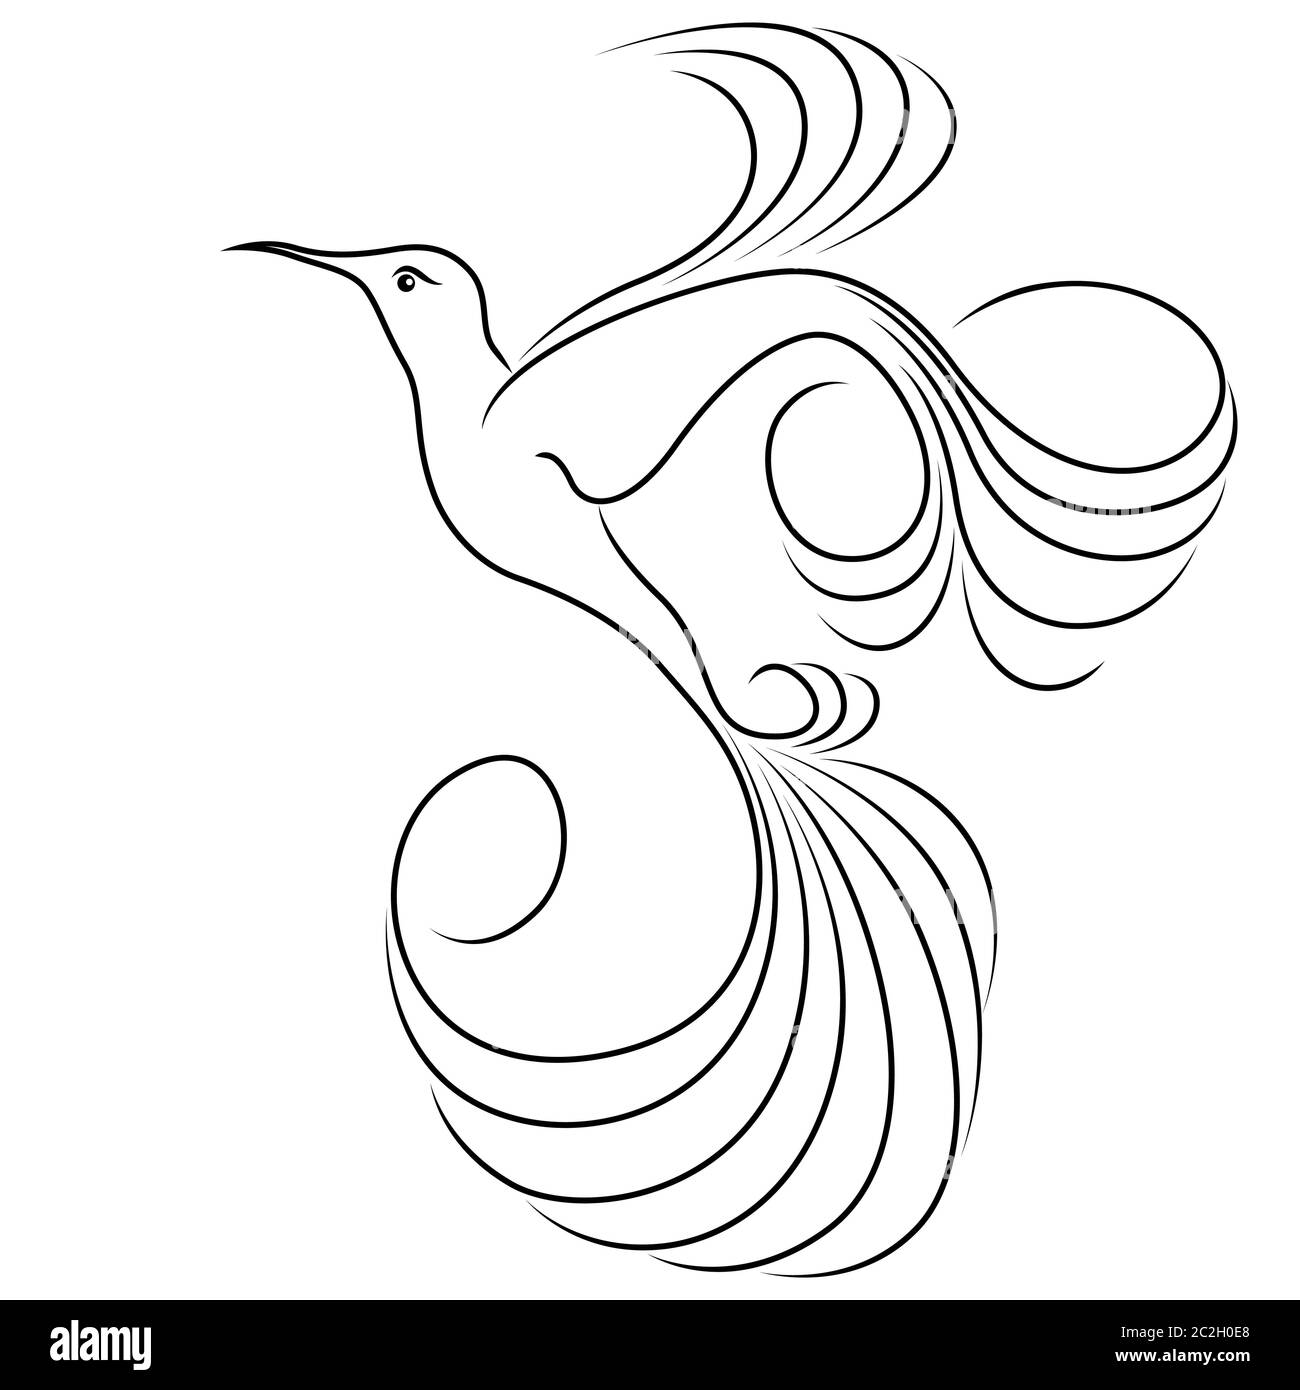 Black outline of abstract flying hummingbird isolated on the white background Stock Vector